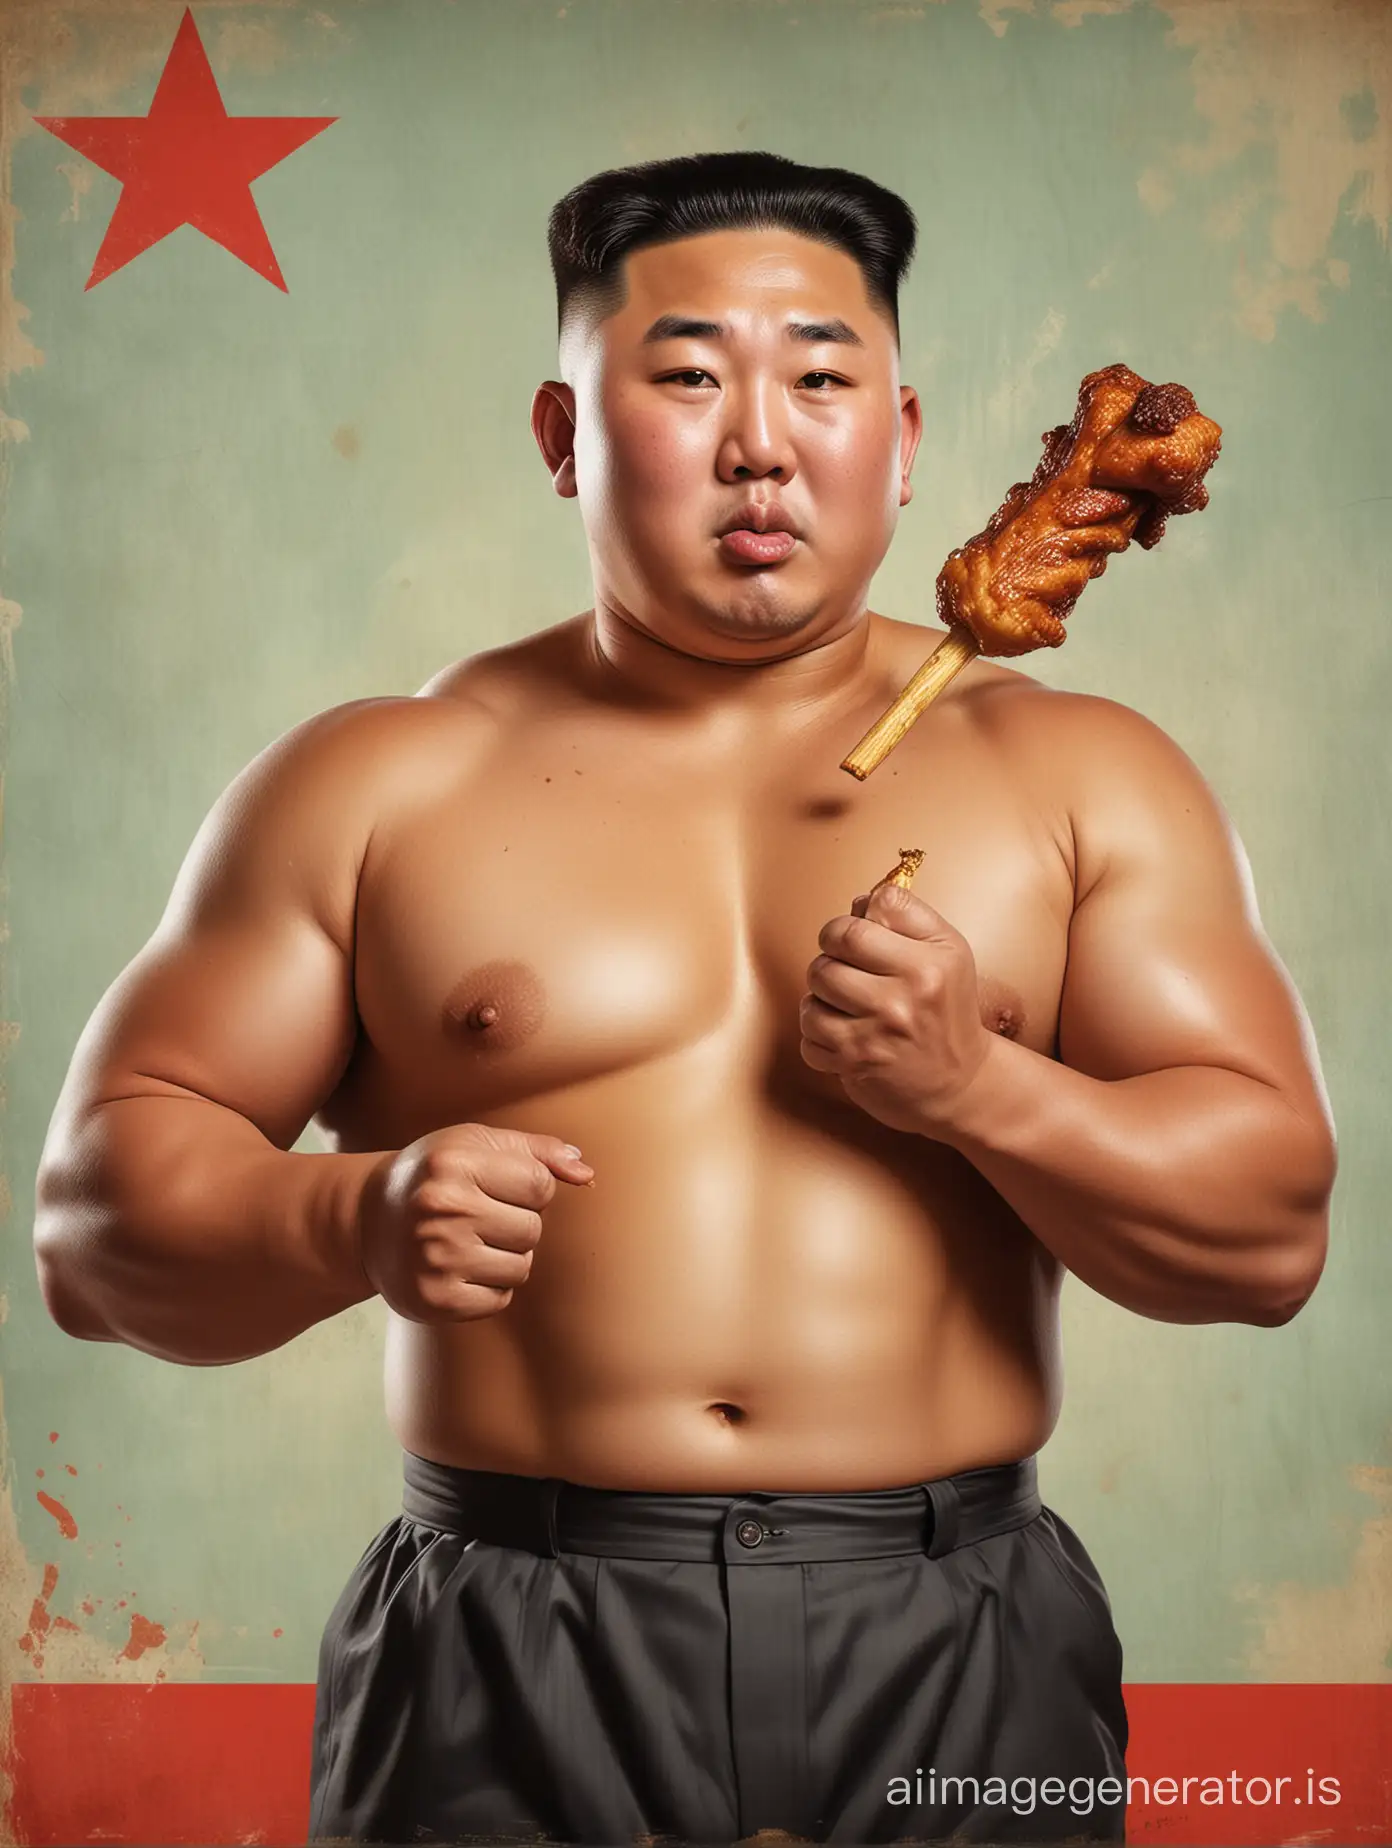 Portrait of Kim Jong-un as a muscly bodybuilder eating chicken drumsticks in the style of a vintage North Korean communist propaganda poster